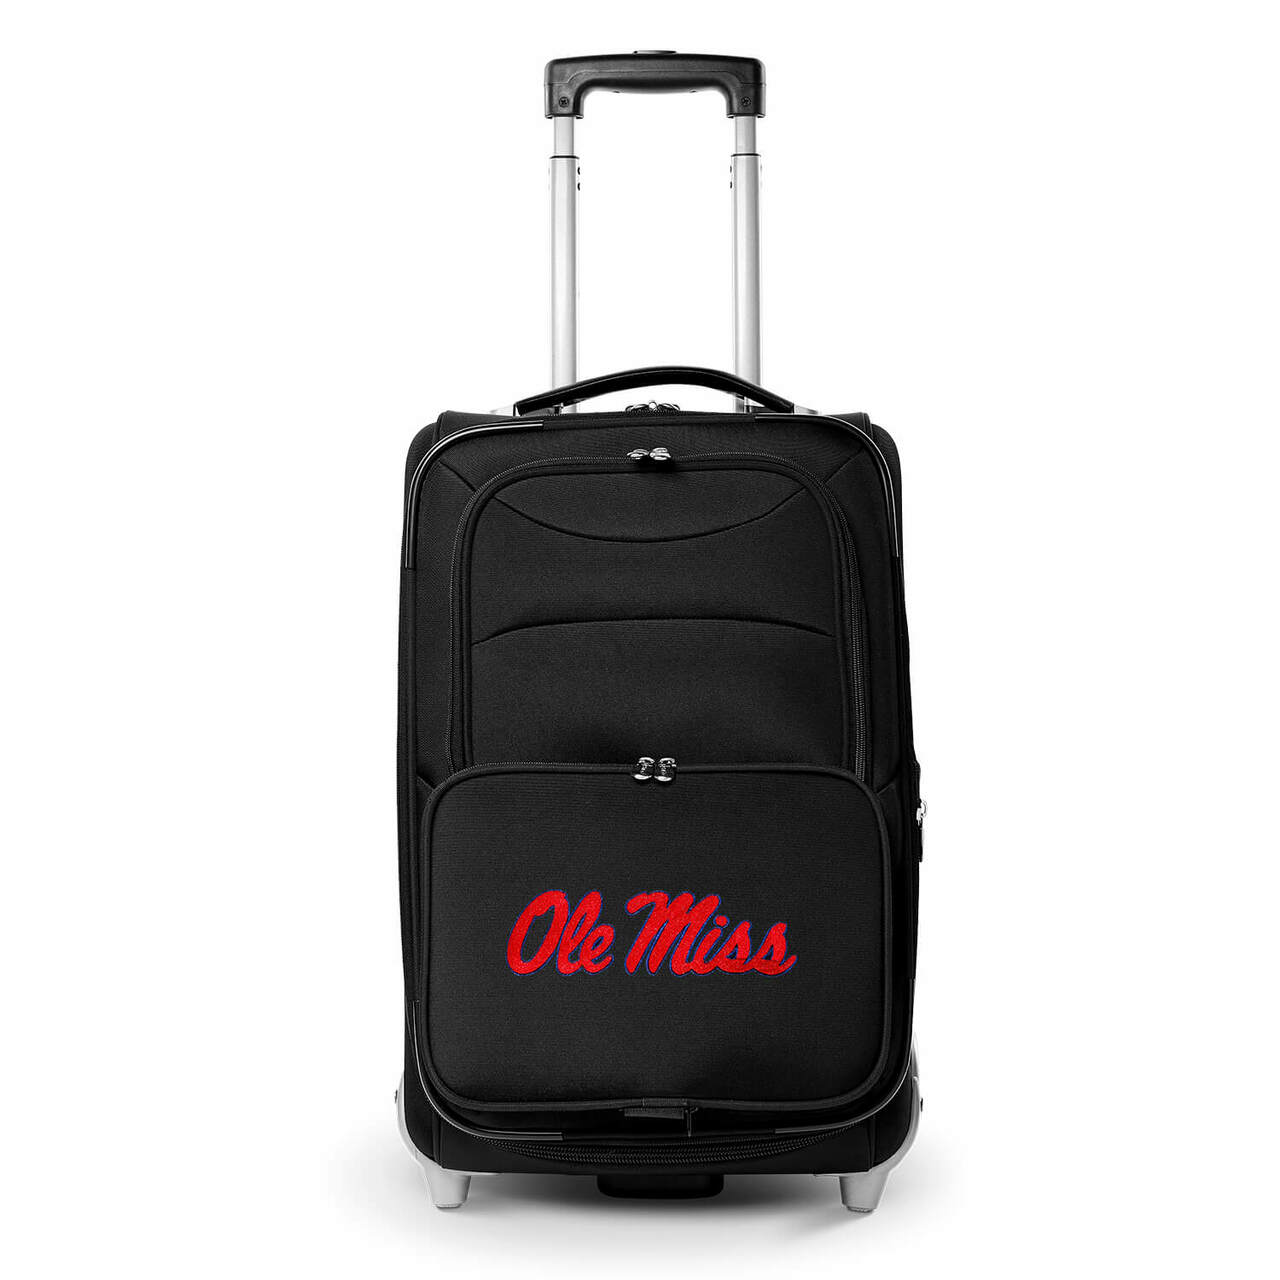 Ole Miss Carry On Luggage | Mississippi Ole Miss Rolling Carry On Luggage